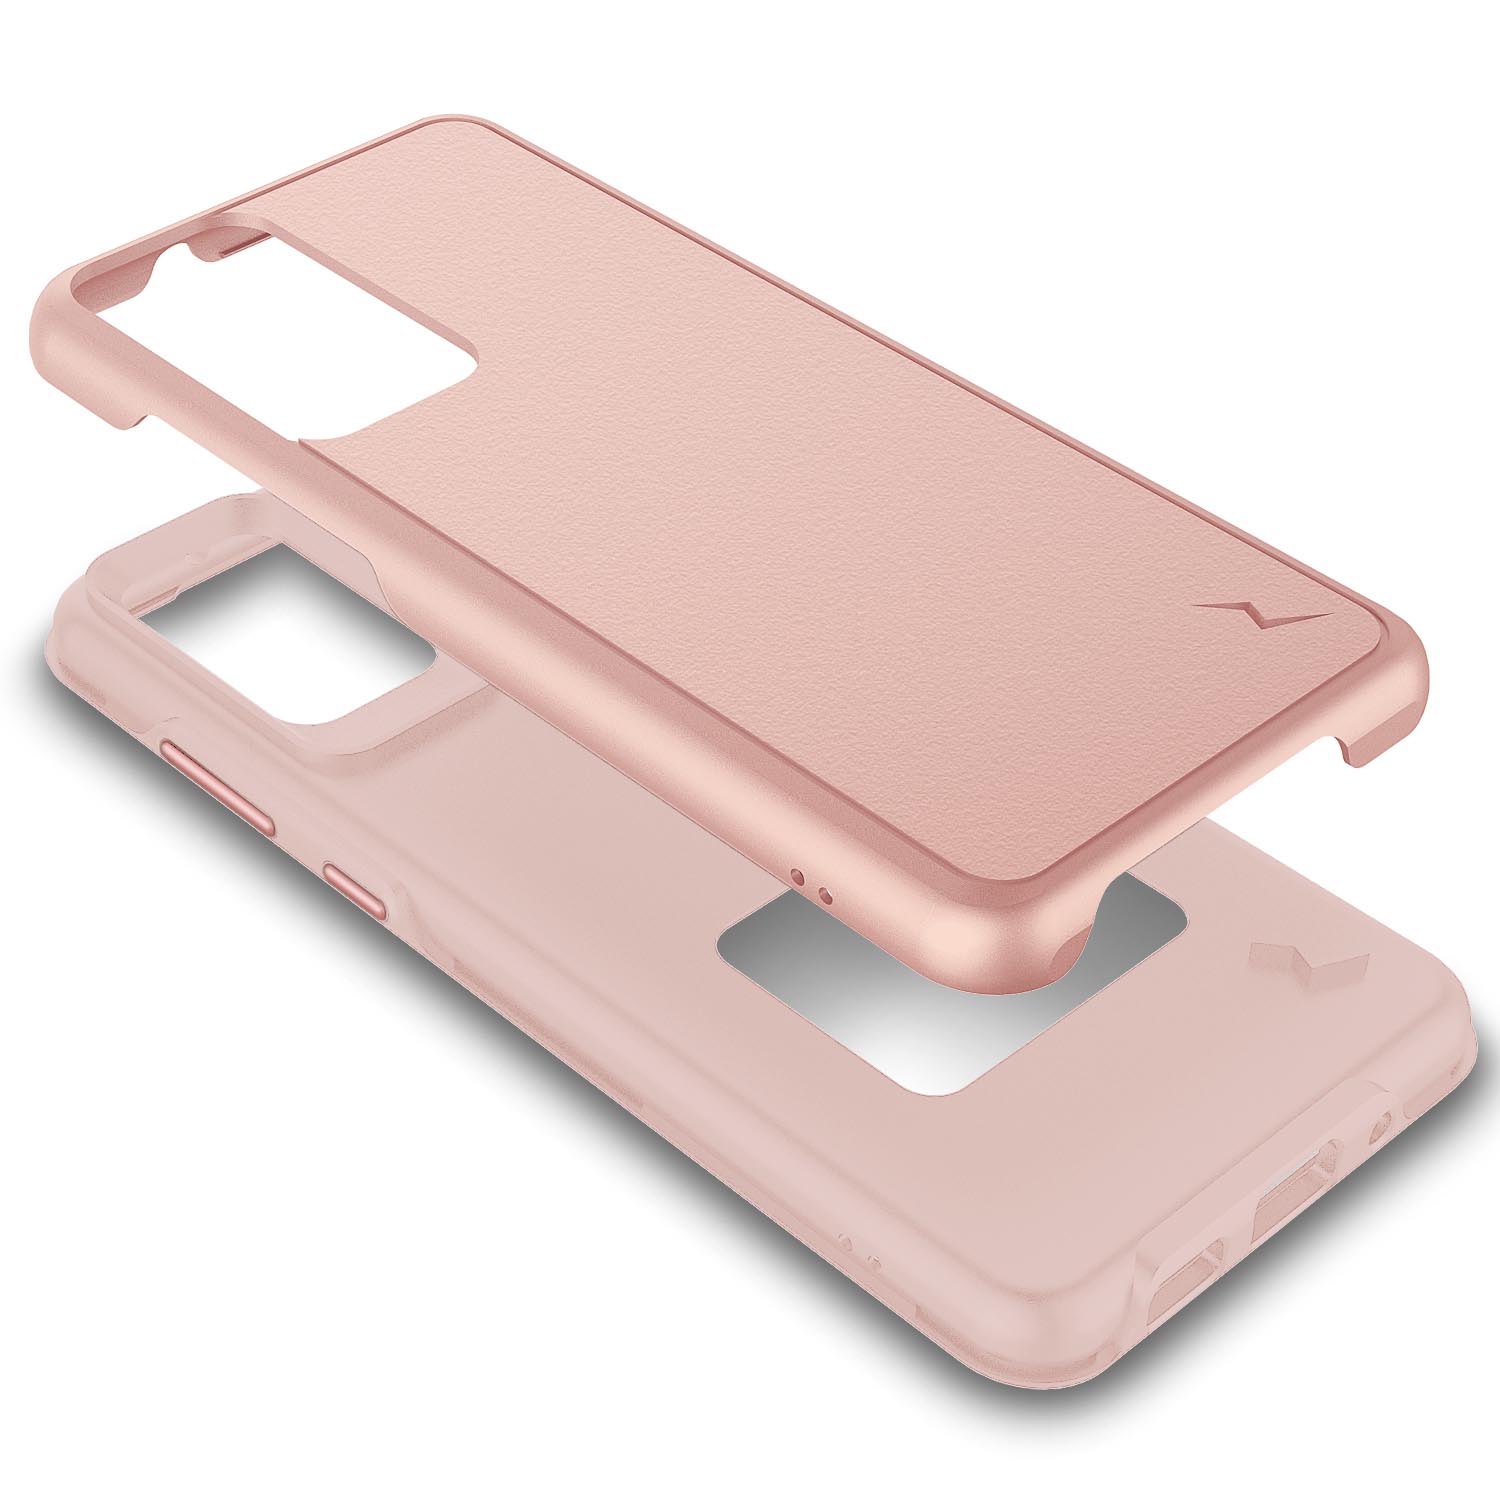 ZIZO DIVISION SERIES GALAXY S20+ CASE - ROSE GOLD (10180)